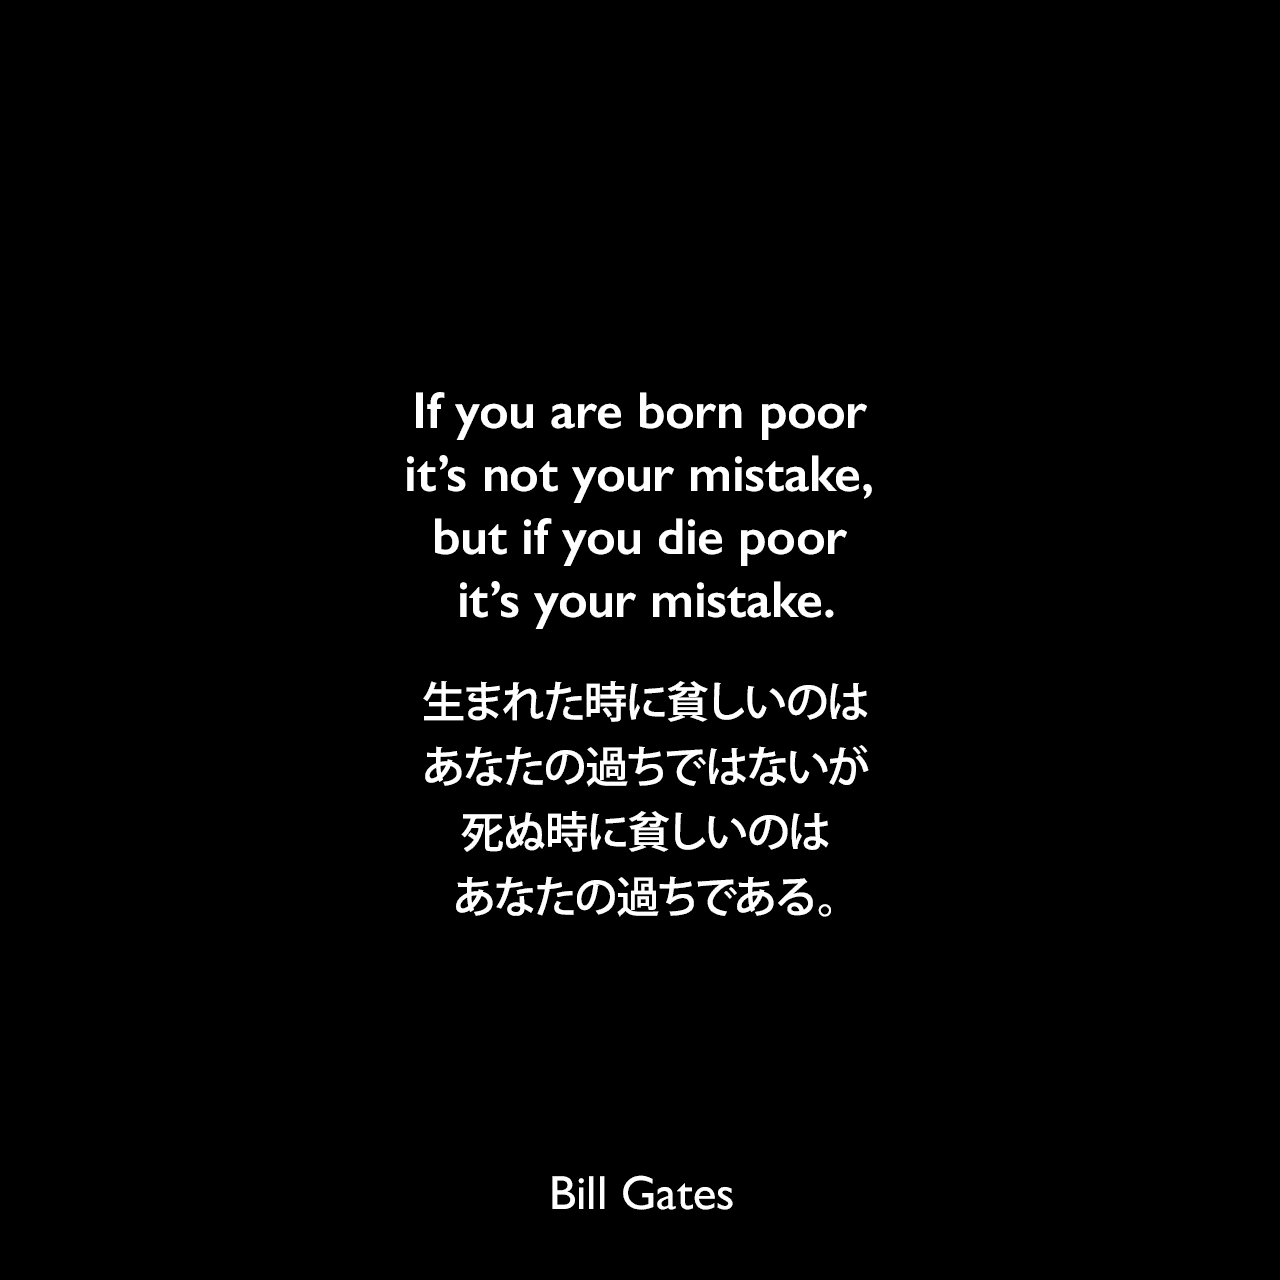 If you are born poor it’s not your mistake, but if you die poor it’s your mistake.生まれた時に貧しいのはあなたの過ちではないが、死ぬ時に貧しいのはあなたの過ちである。Bill Gates